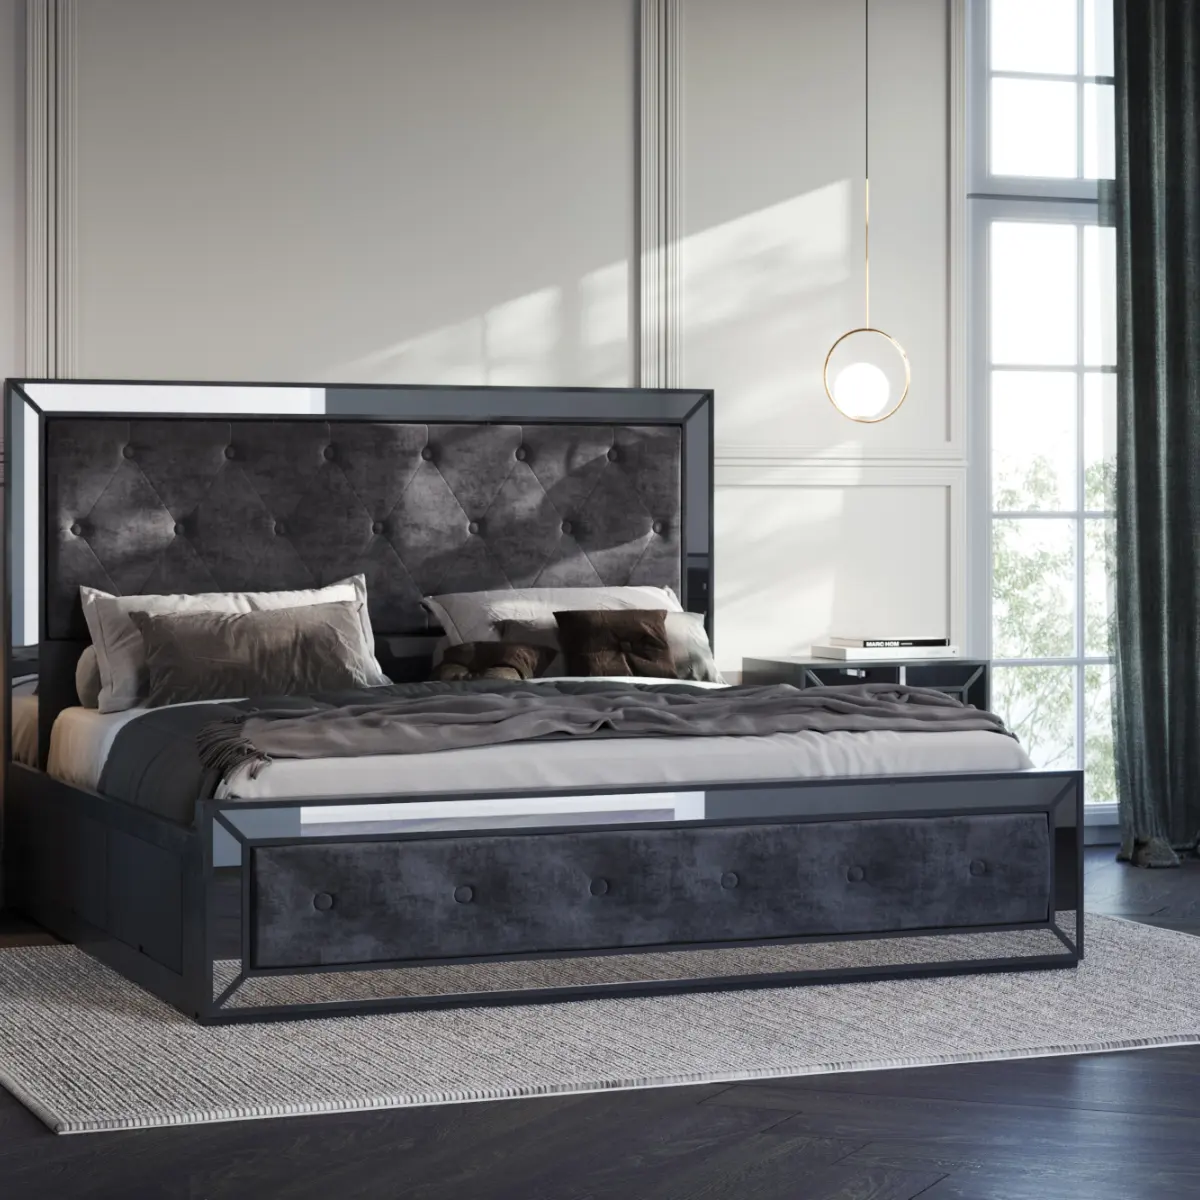 High Quality Mirrored Queen Size Bedroom Set Furniture Black Frame Bedroom Mirrored Bed